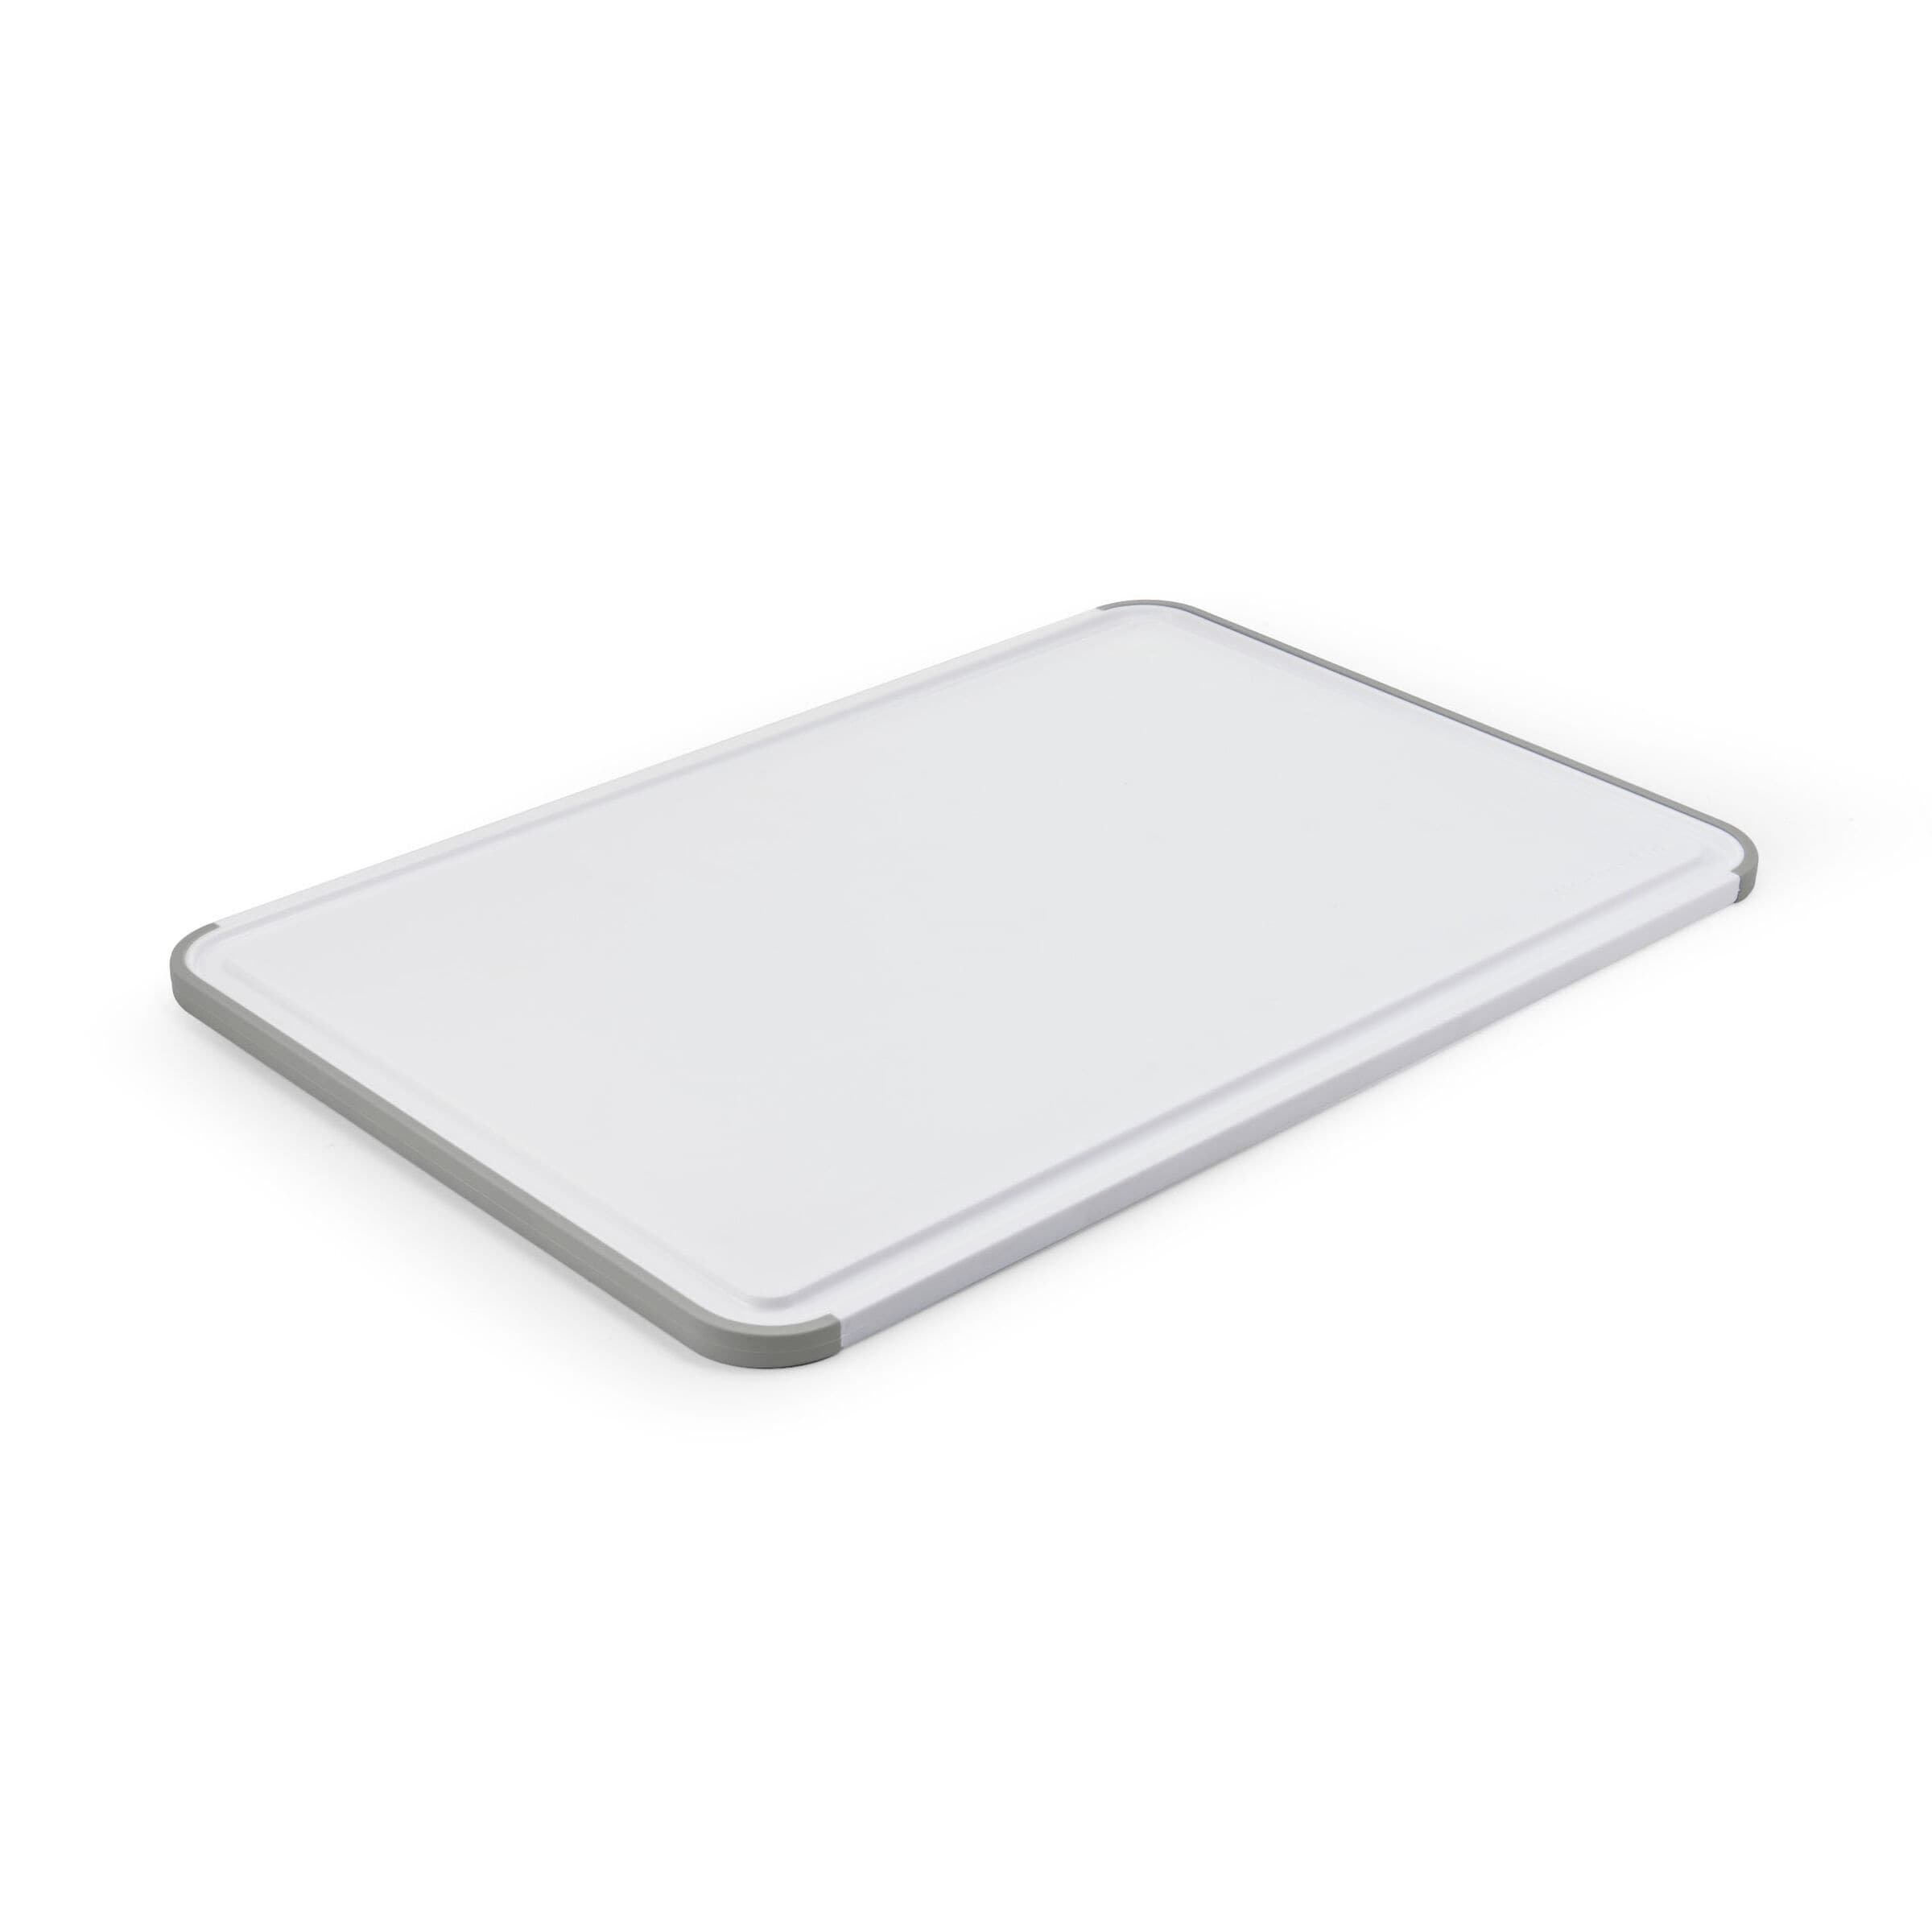 JoyJolt Cutting Board Set-Cutting Boards for Kitchen-Non Slip Large & Small  Chopping Boards; Meat Cutting Board with Juice Groove-White & Grey